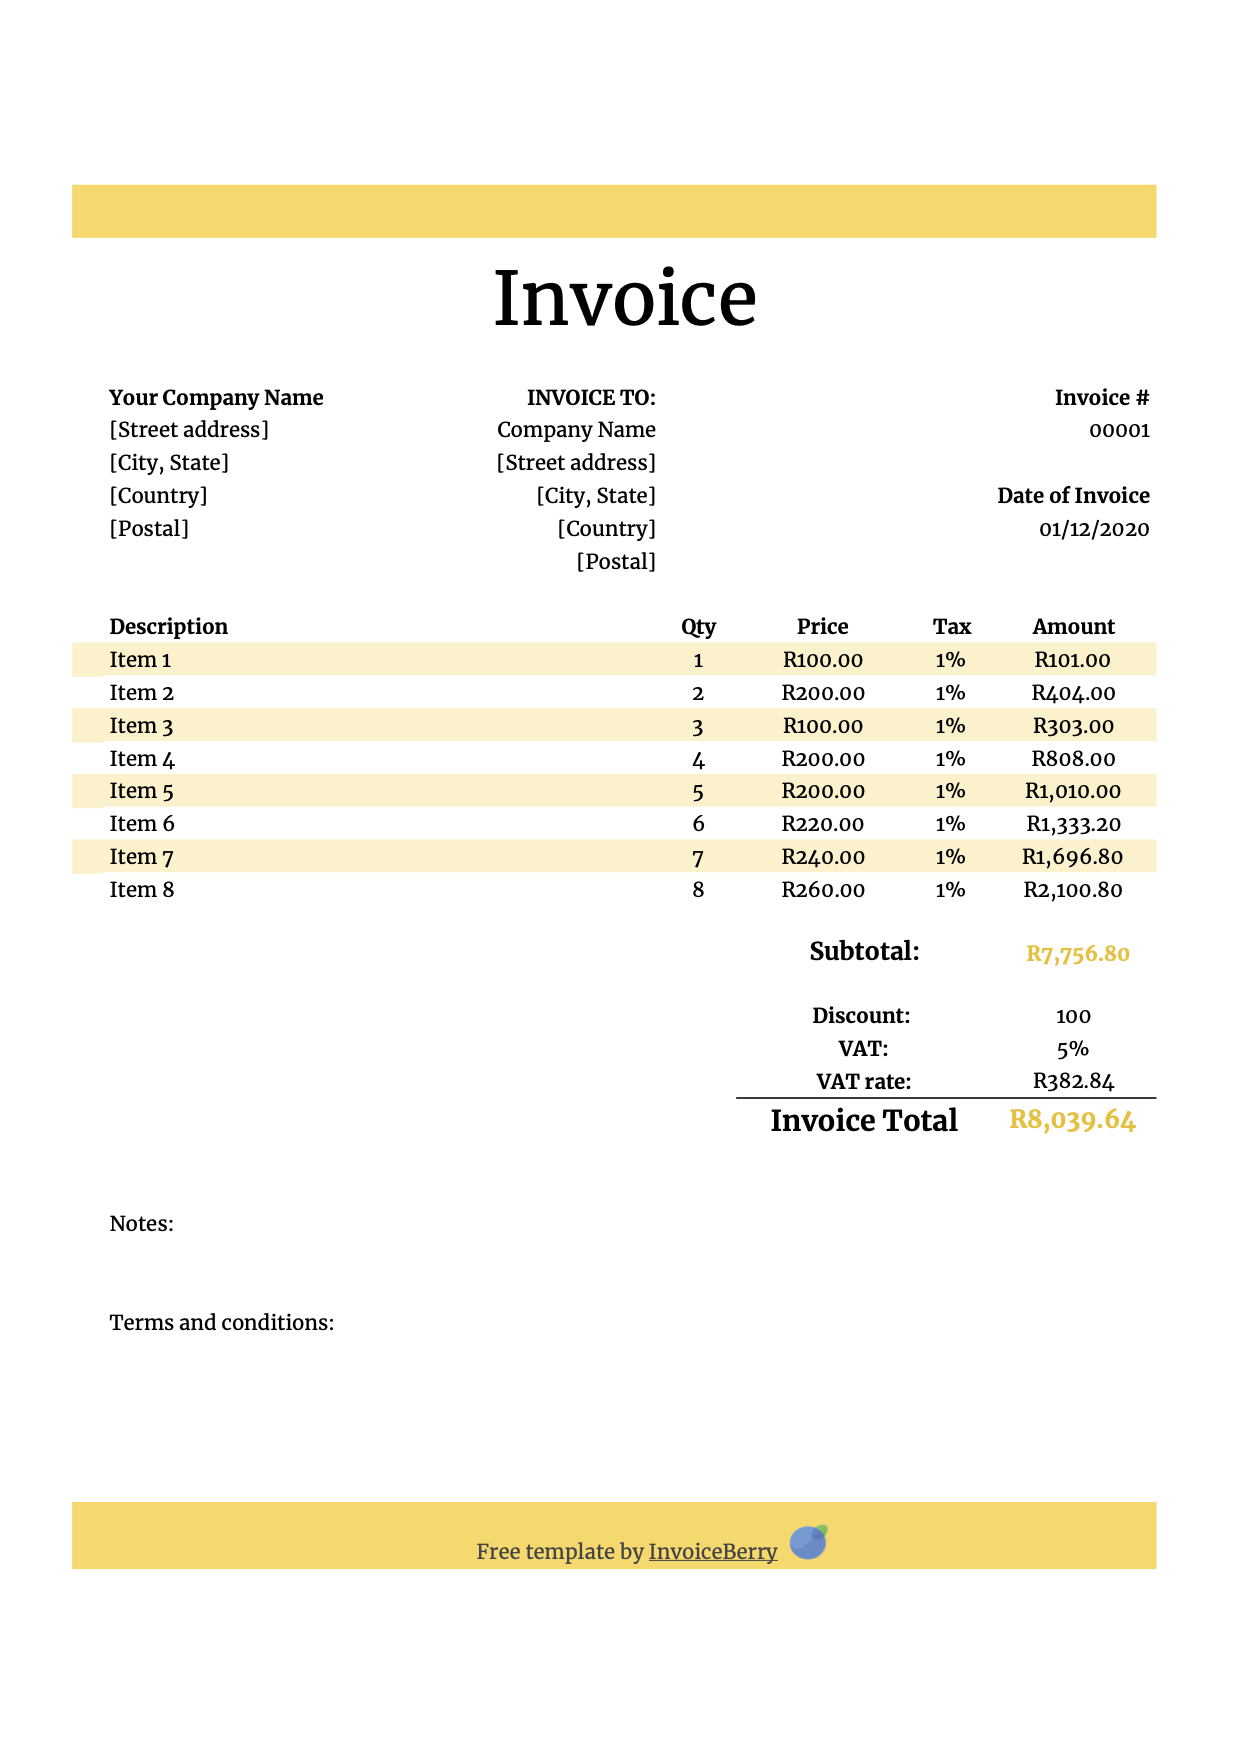 Free Numbers invoice templates - get invoice templates for Mac With Regard To Free Invoice Template Word Mac